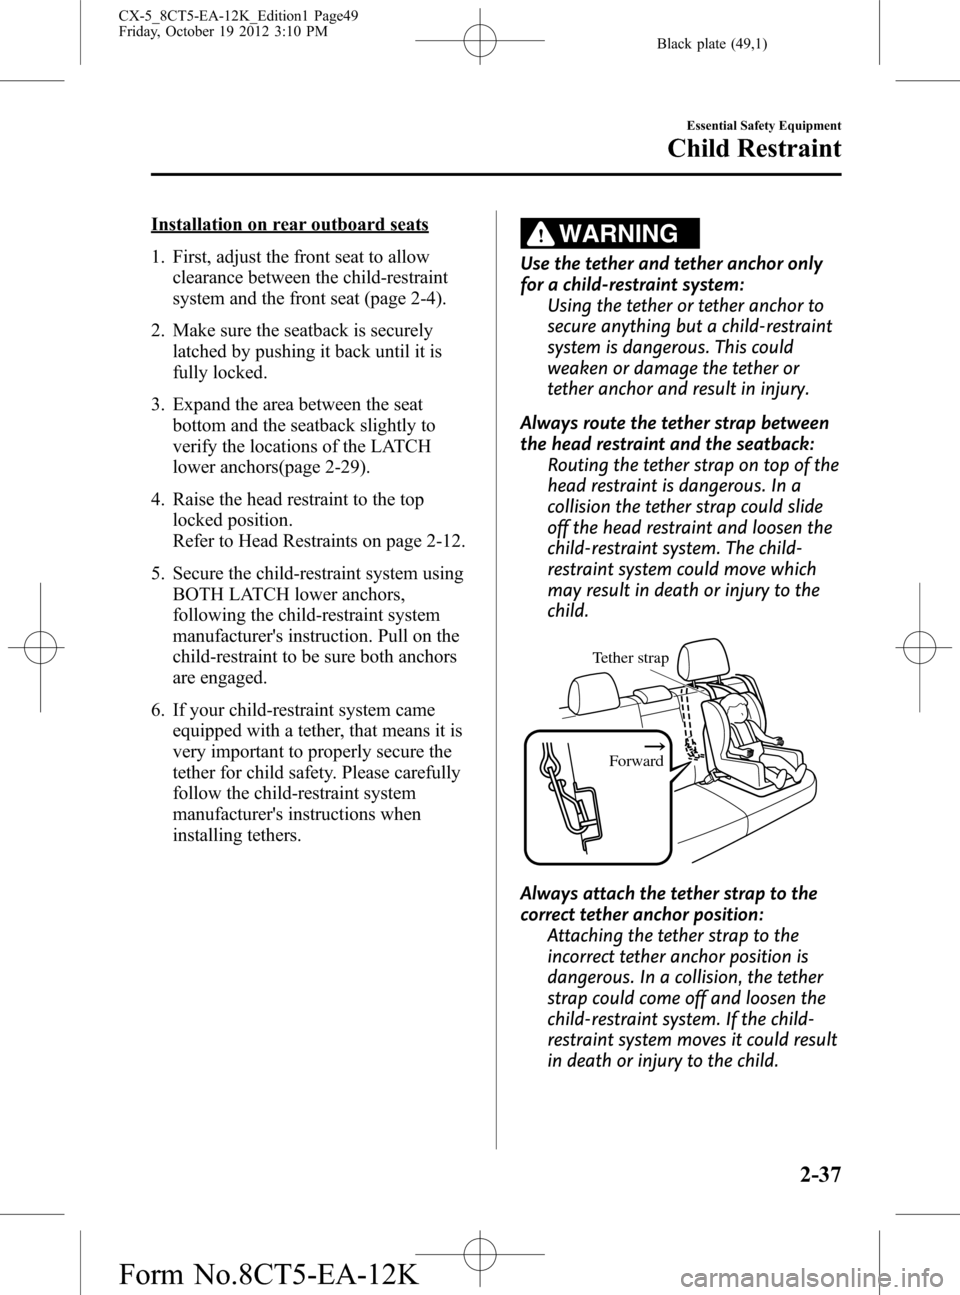 MAZDA MODEL CX-5 2014  Owners Manual (in English) Black plate (49,1)
Installation on rear outboard seats
1. First, adjust the front seat to allow
clearance between the child-restraint
system and the front seat (page 2-4).
2. Make sure the seatback is